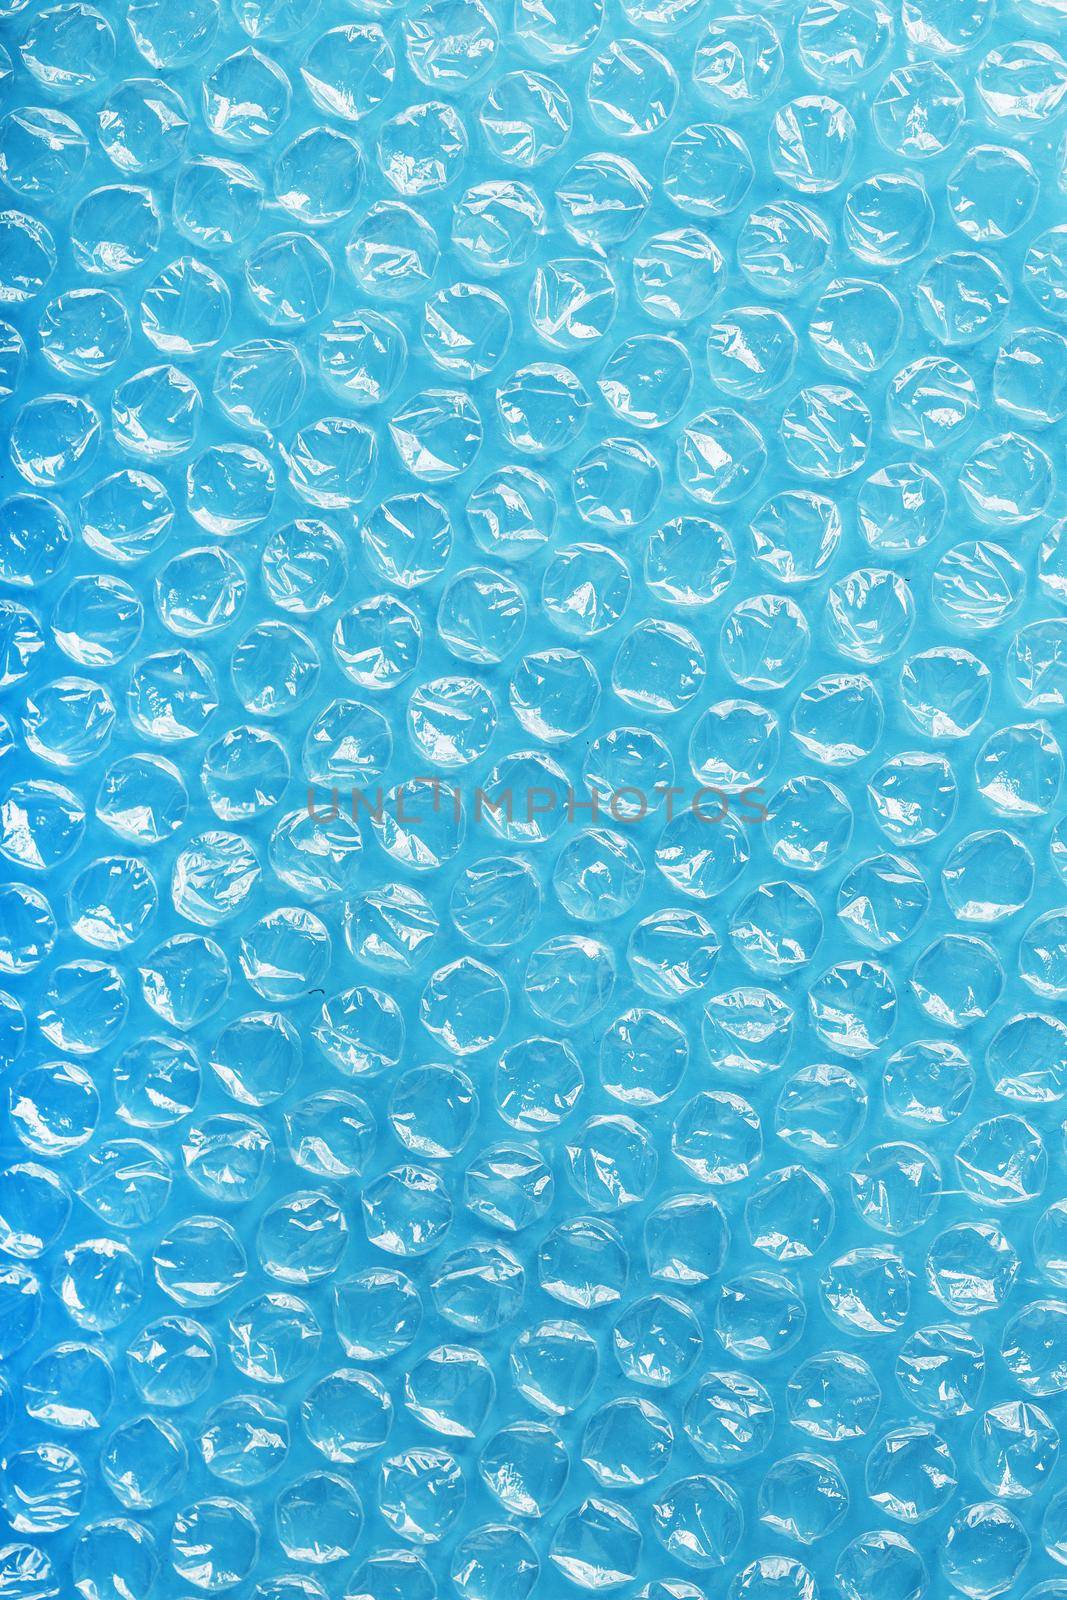 Packing bubble wrap for parcels on a blue background in full screen by AlexGrec